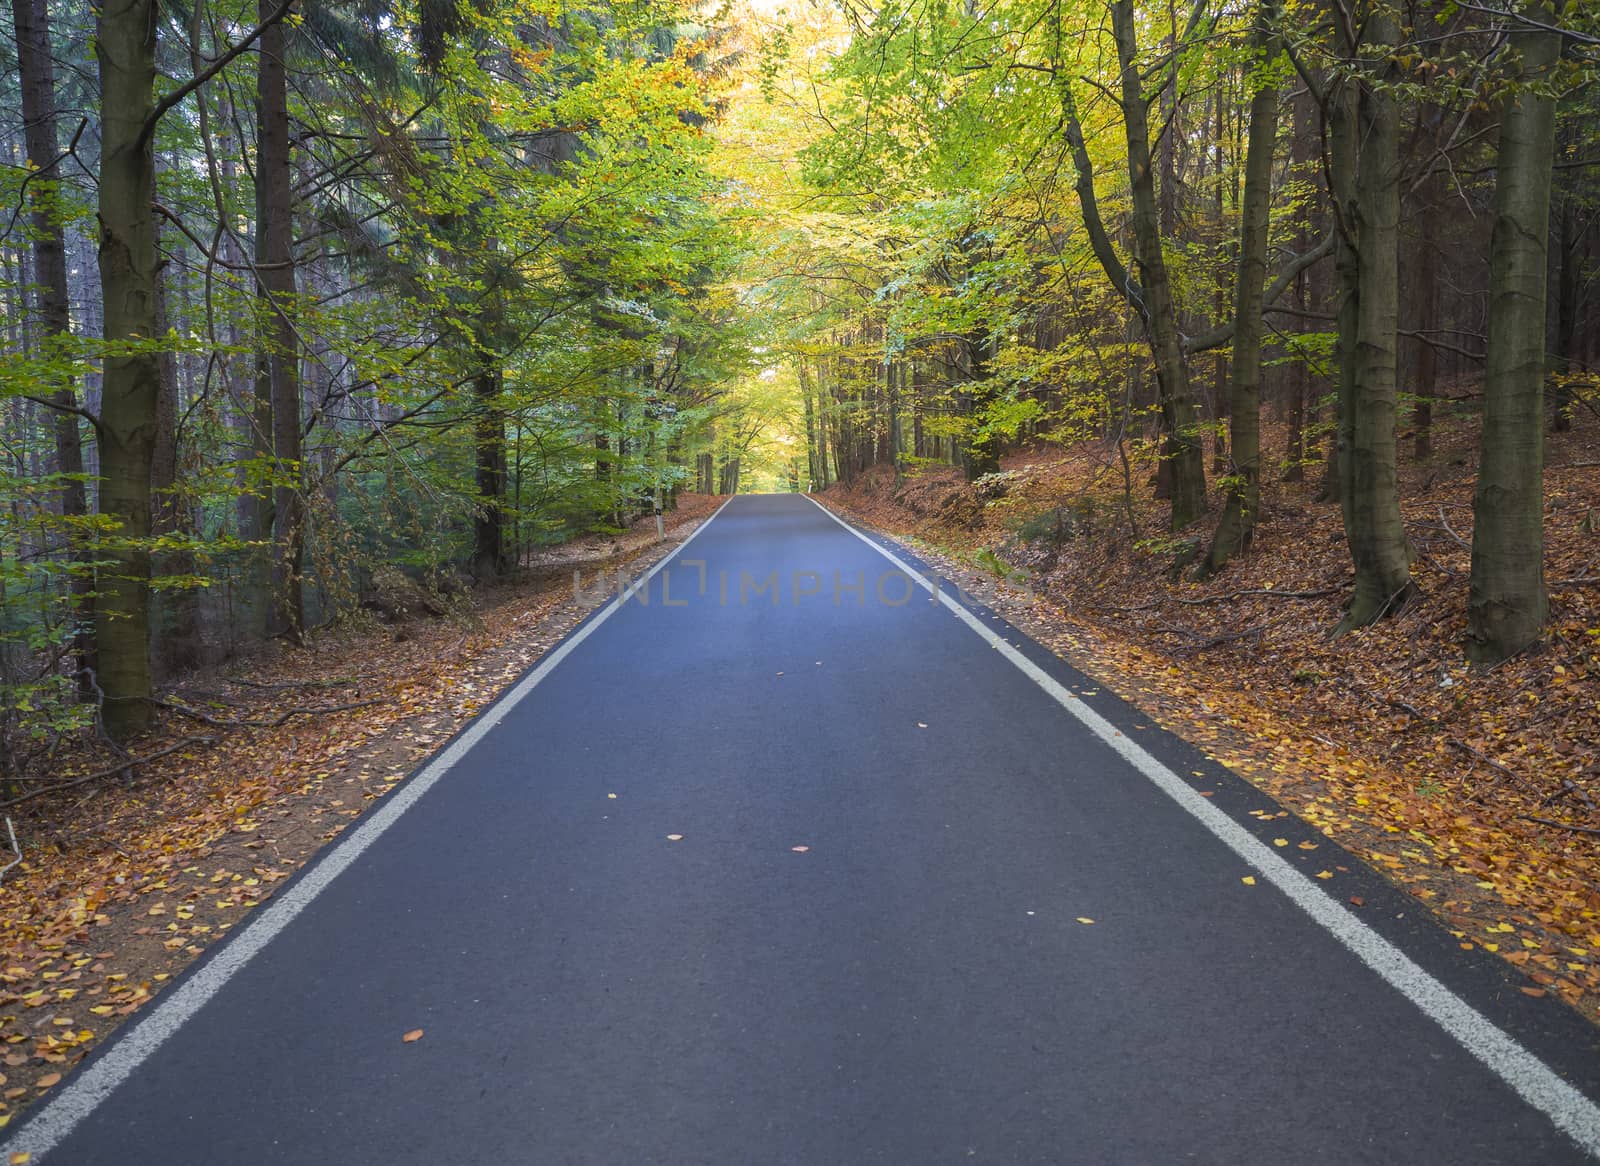 Straight Stretch of a Asphalt road through colorful deciduous forest in the autumn with fallen leaves of oak and Maple Trees, deminishing perspective.